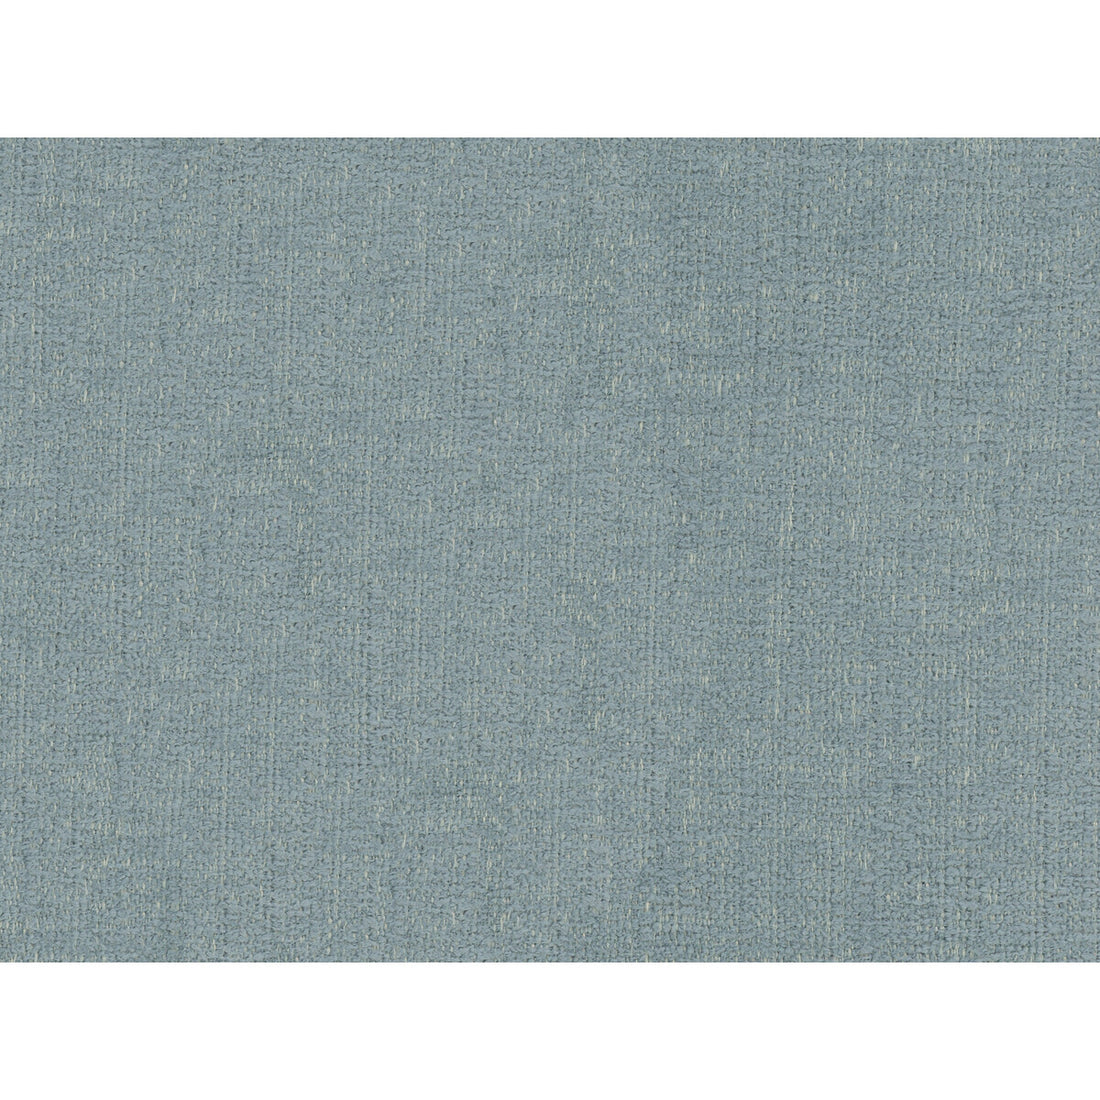 Kravet Smart fabric in 34622-15 color - pattern 34622.15.0 - by Kravet Smart in the Performance Crypton Home collection